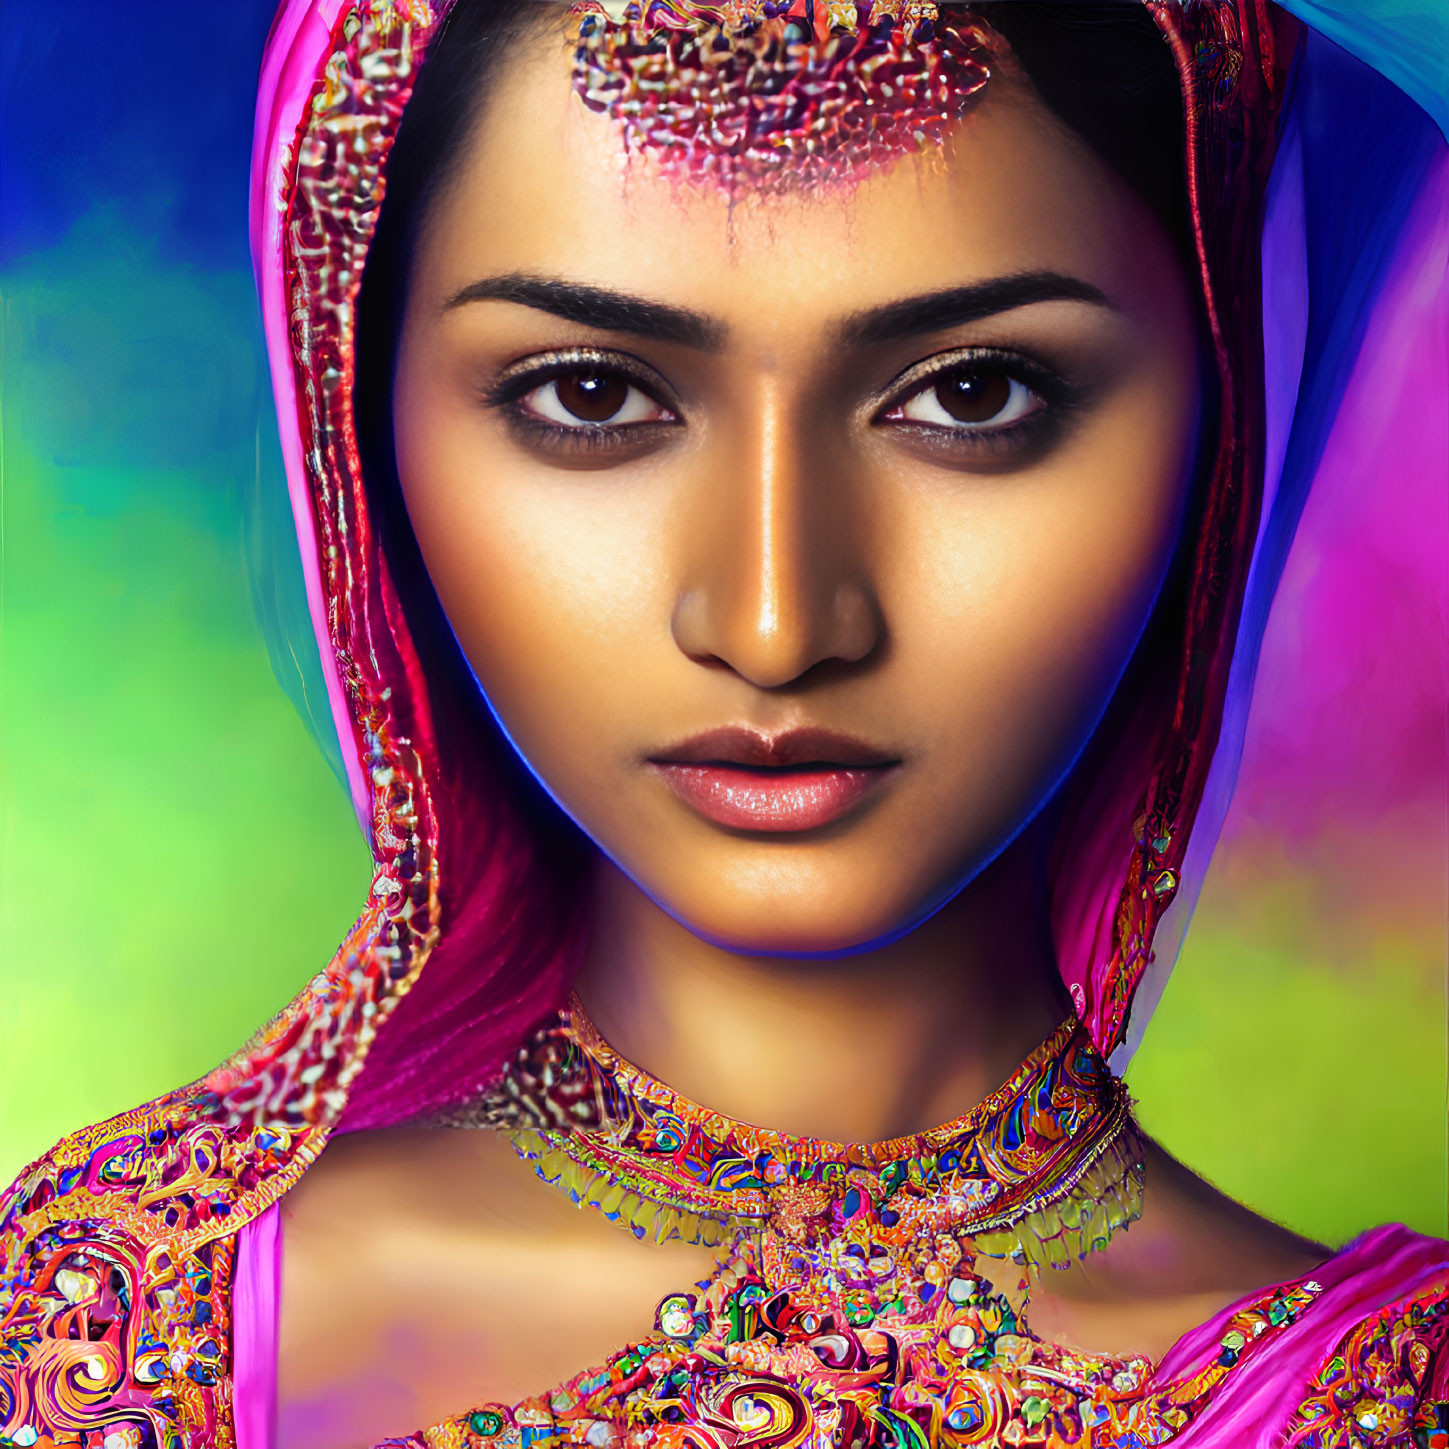 Traditional South Asian beauty with vibrant dupatta, henna, and ornate jewelry.